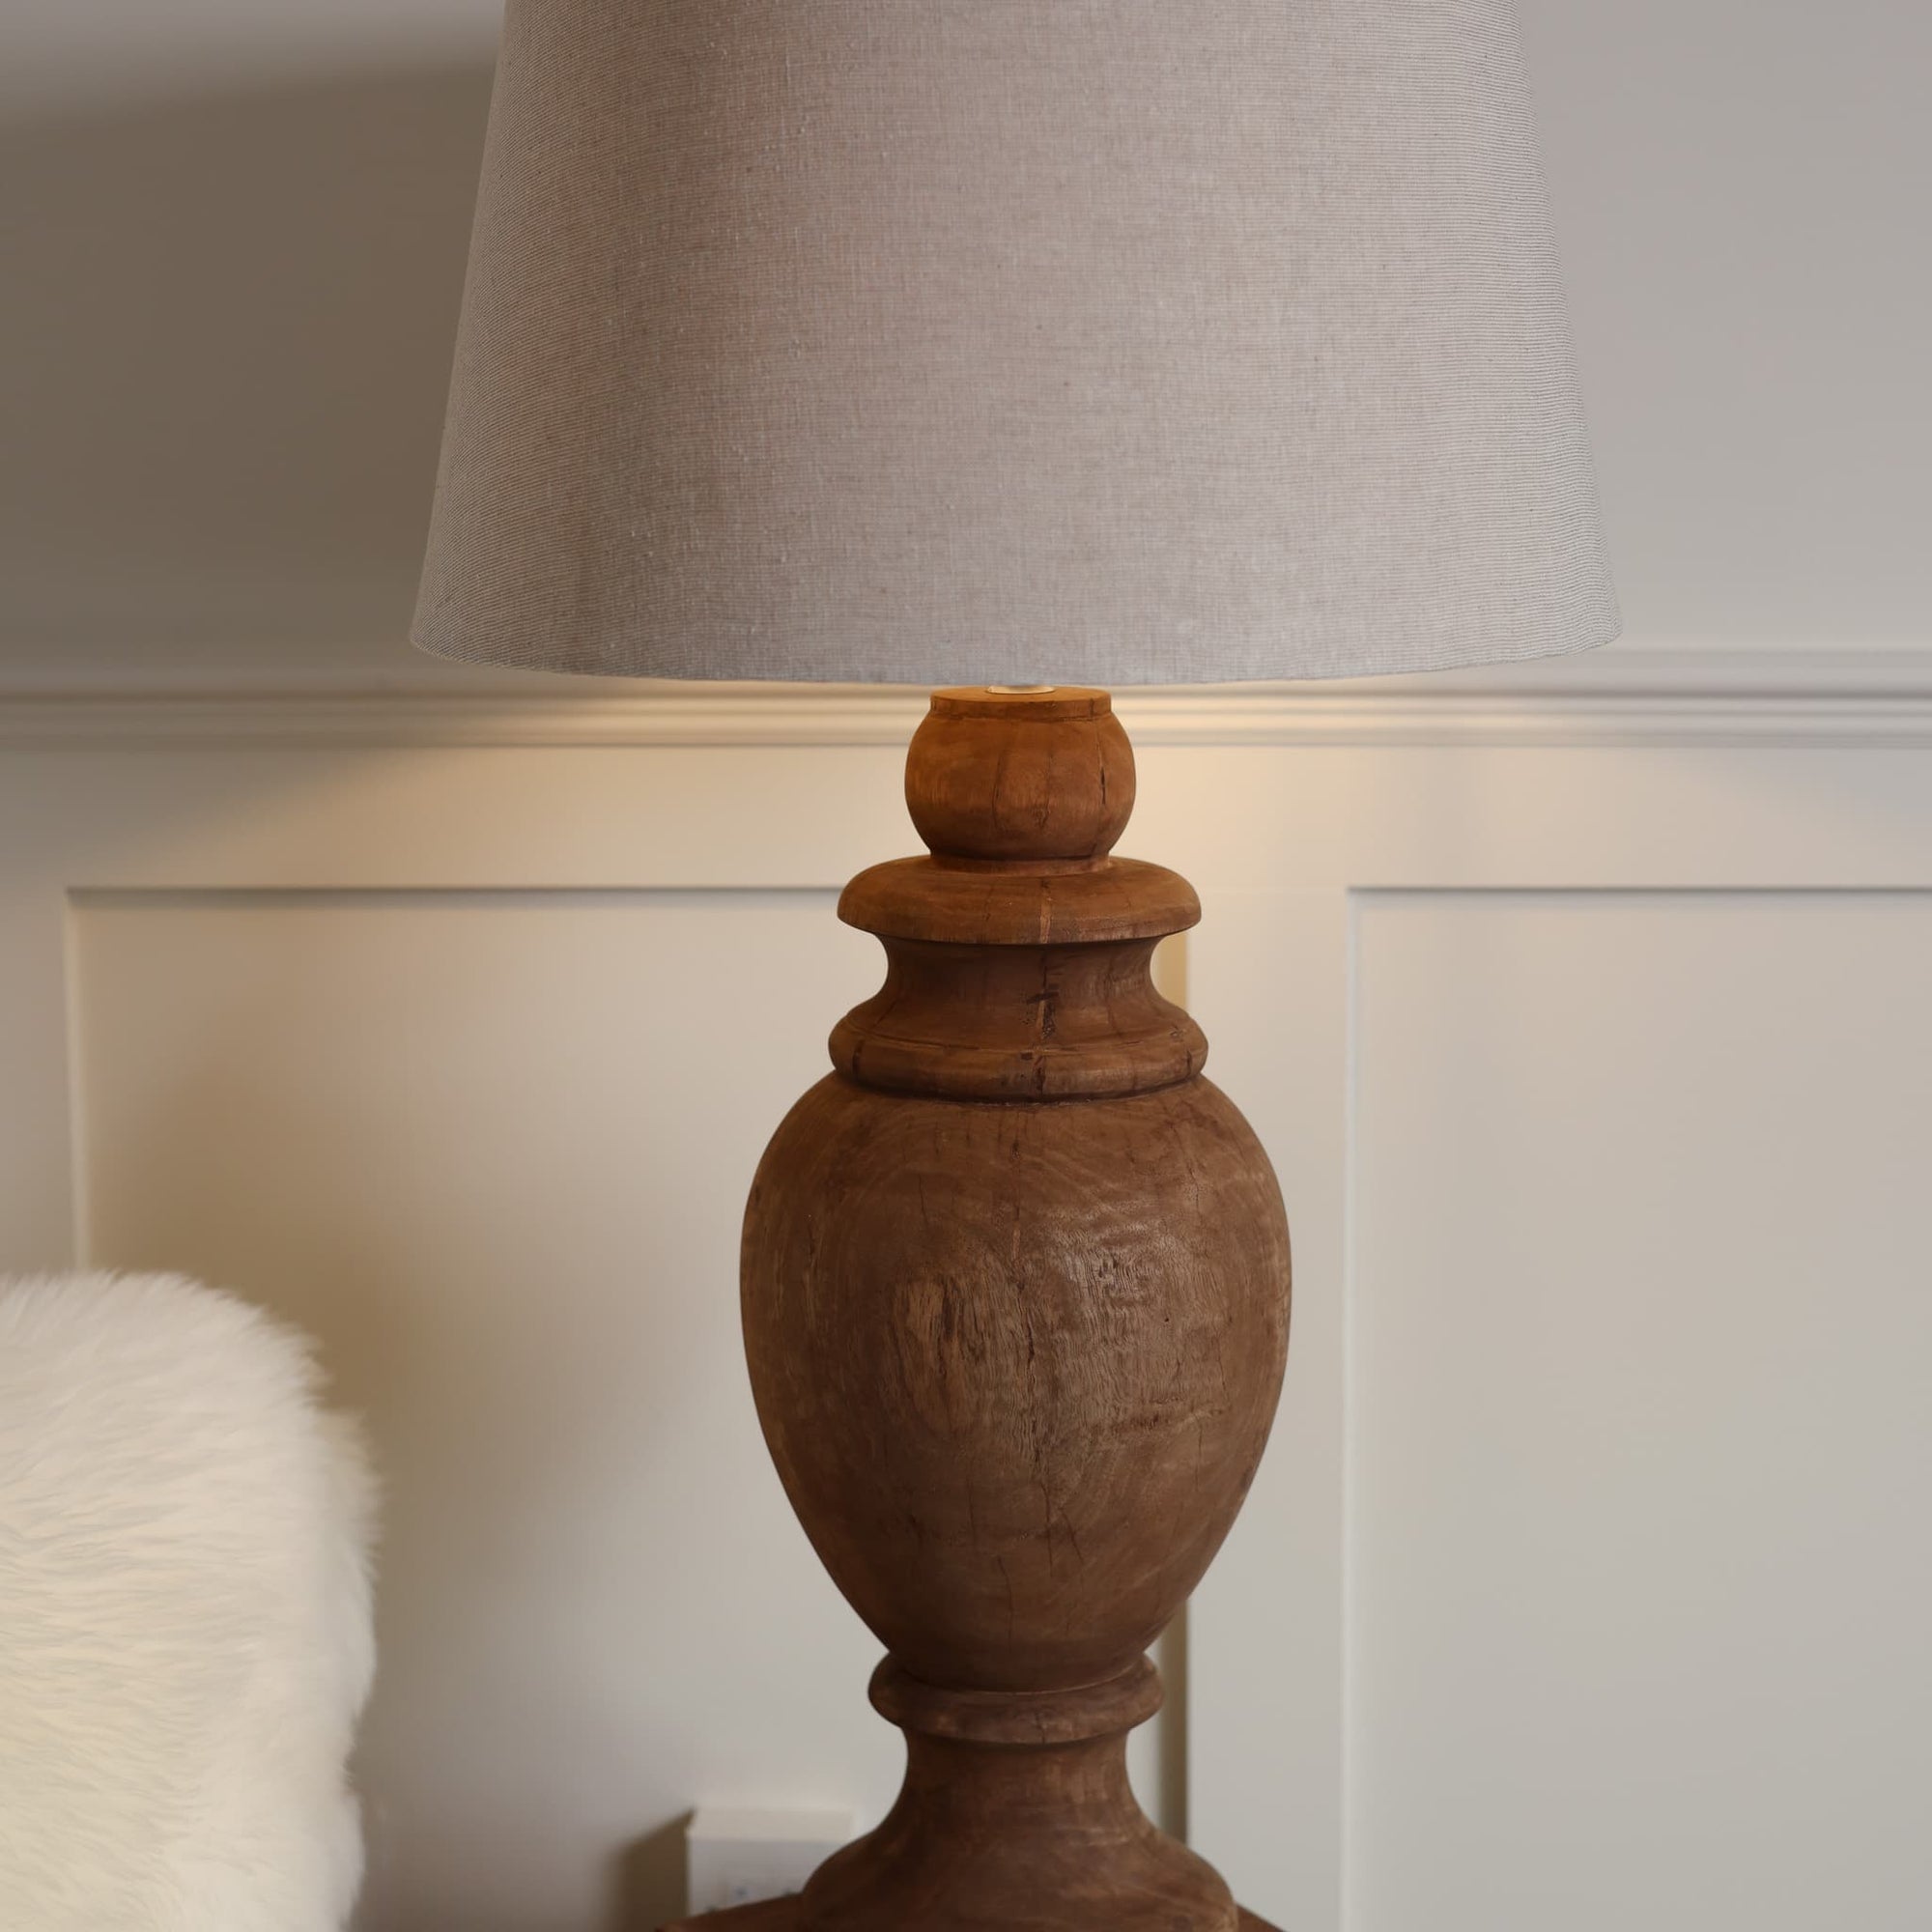 Wooden lamp lit close up with linen lamp shade. 